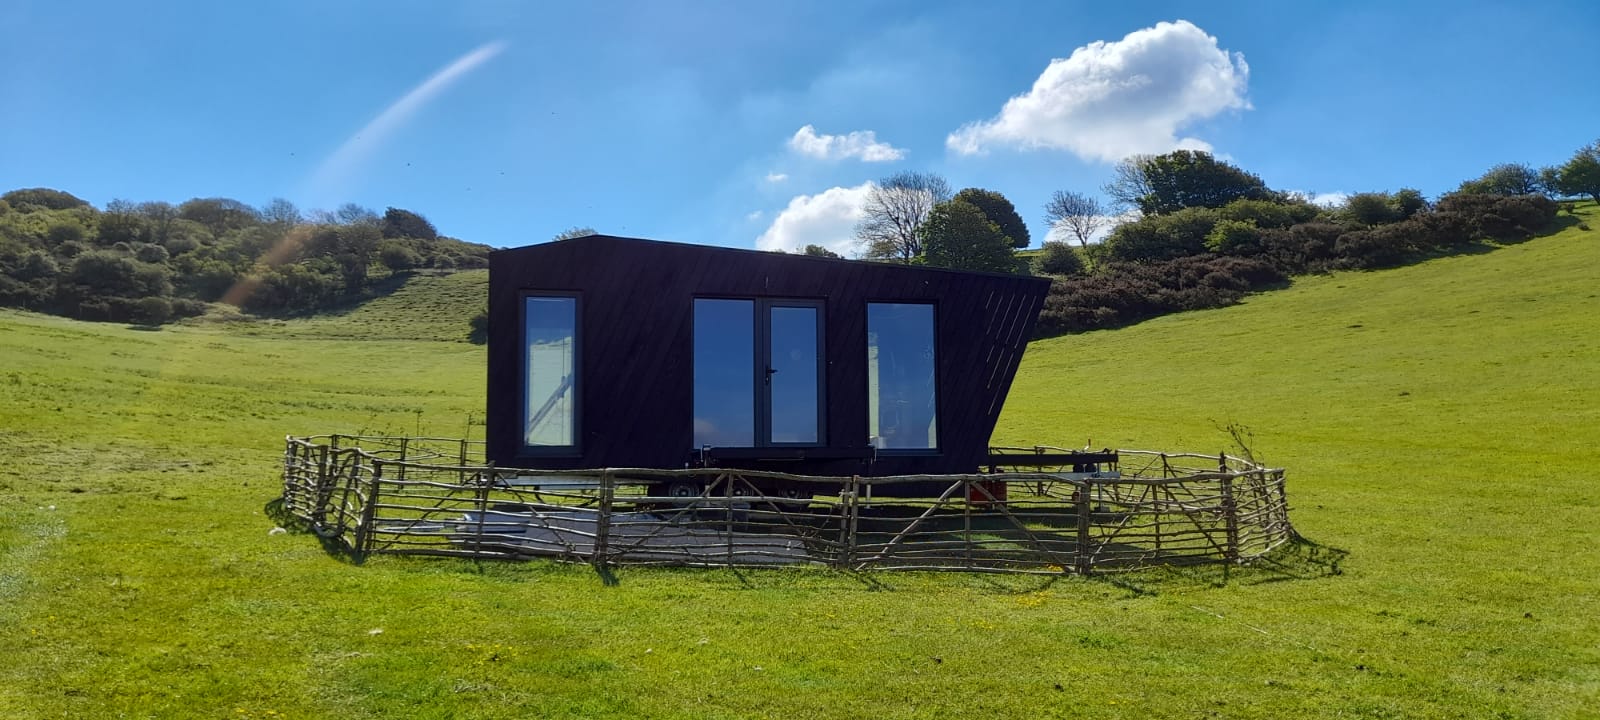 Life Space Cabins. CARRavan A bespoke luxury contemporary cabin on wheels